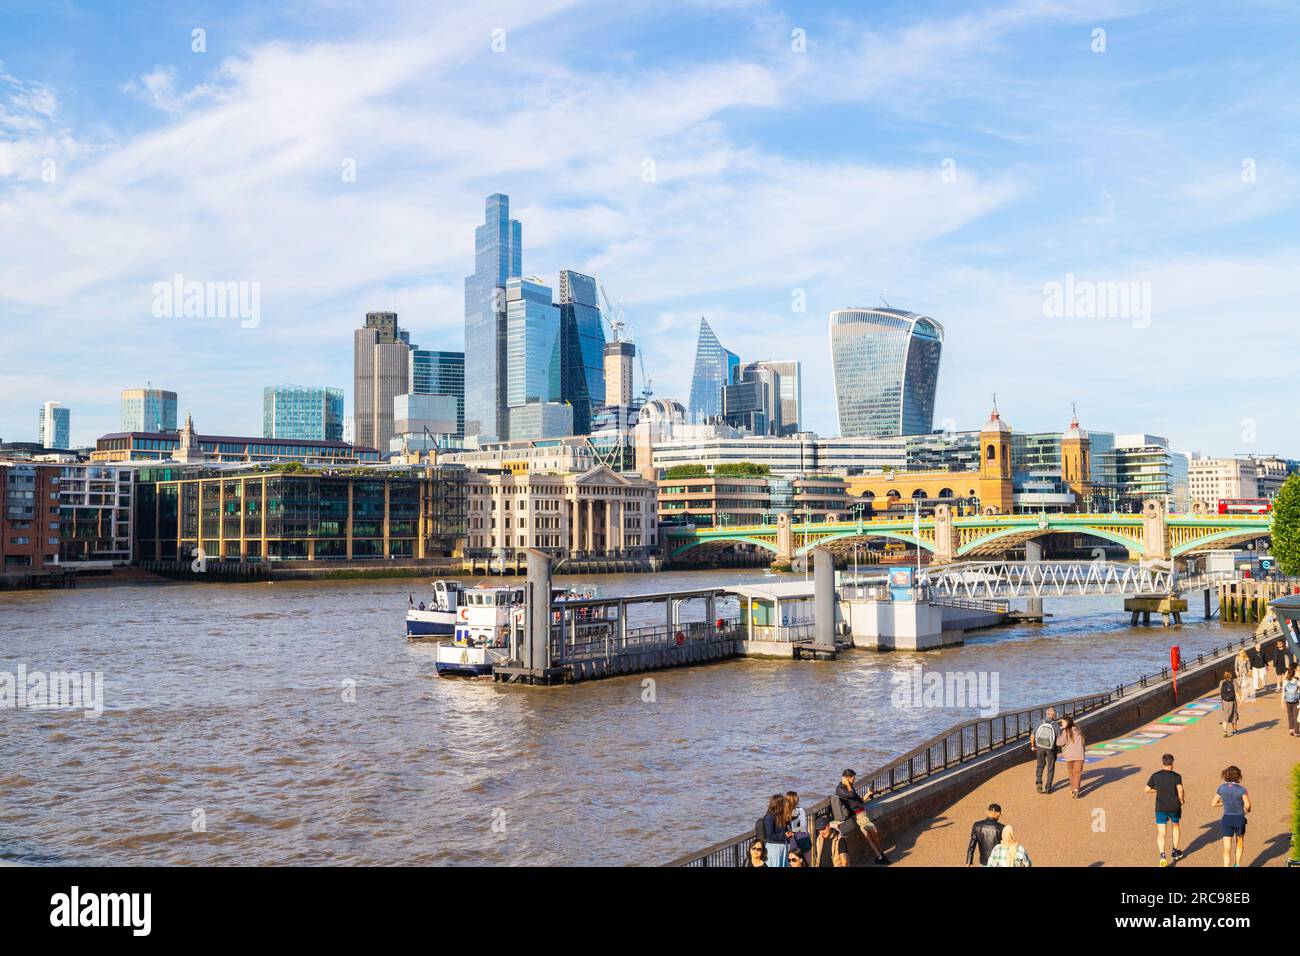 LONDON, UK - 6TH JULY 2023: Bankside and City of London skyline during the day. People can be seen on the path. Stock Photo